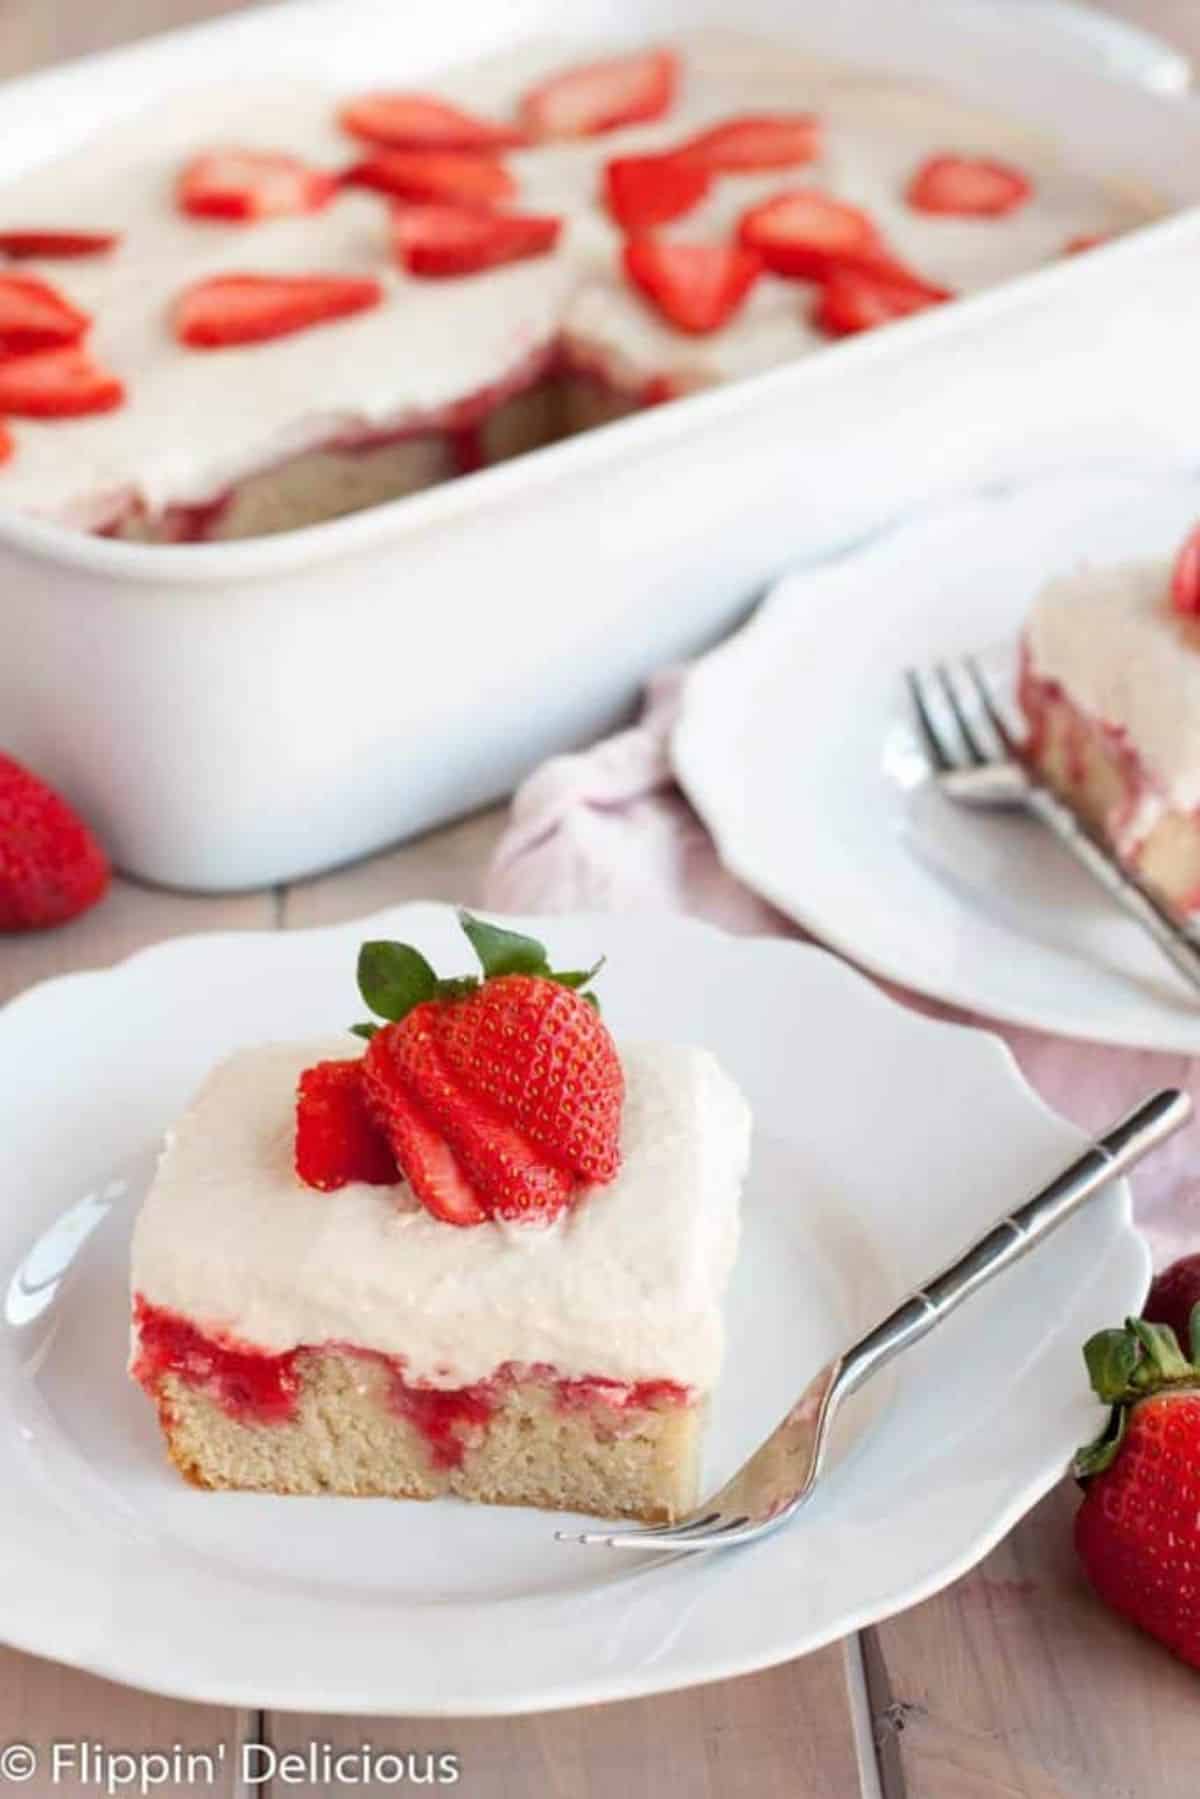 A piece of Dairy Free Gluten-Free Strawberries and Cream Poke Cake on a white plate with a fork.